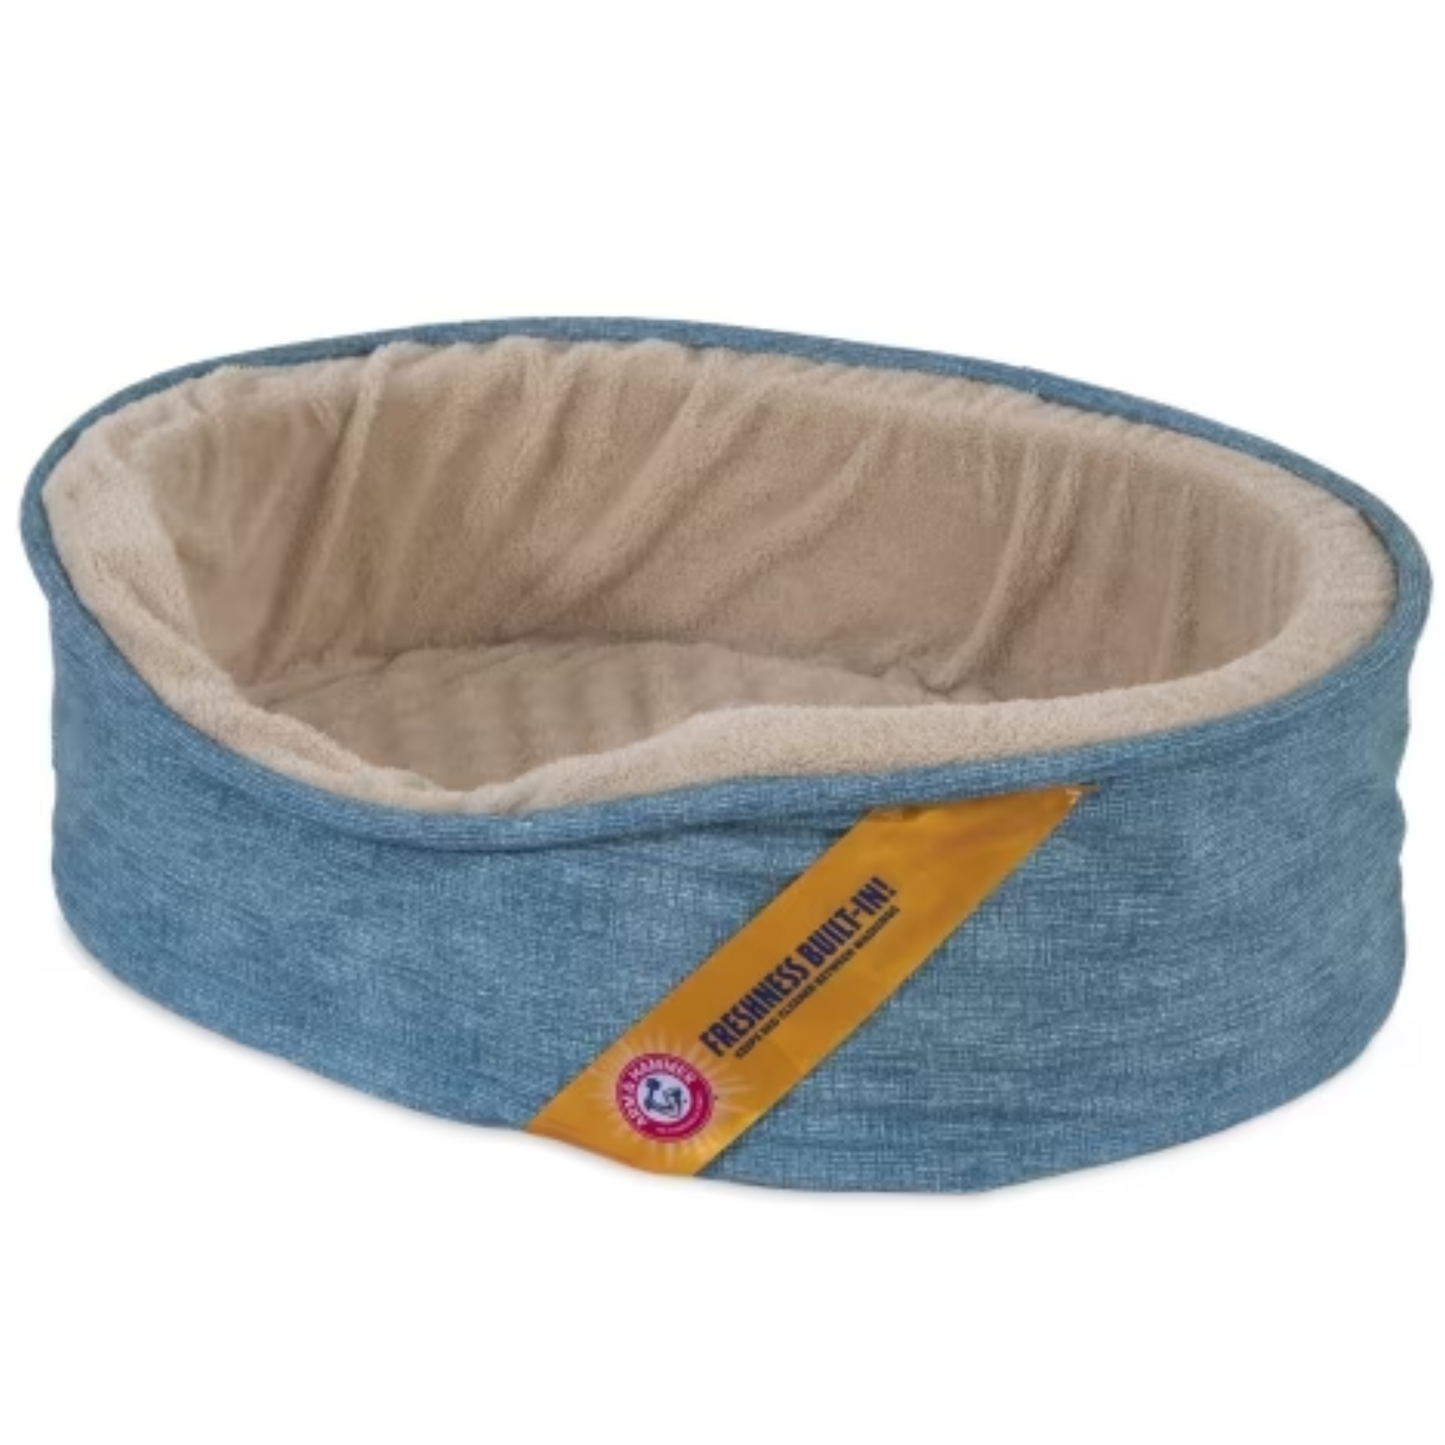 Petmate Arm & Hammer Oval Foam Lounger Bed- DS